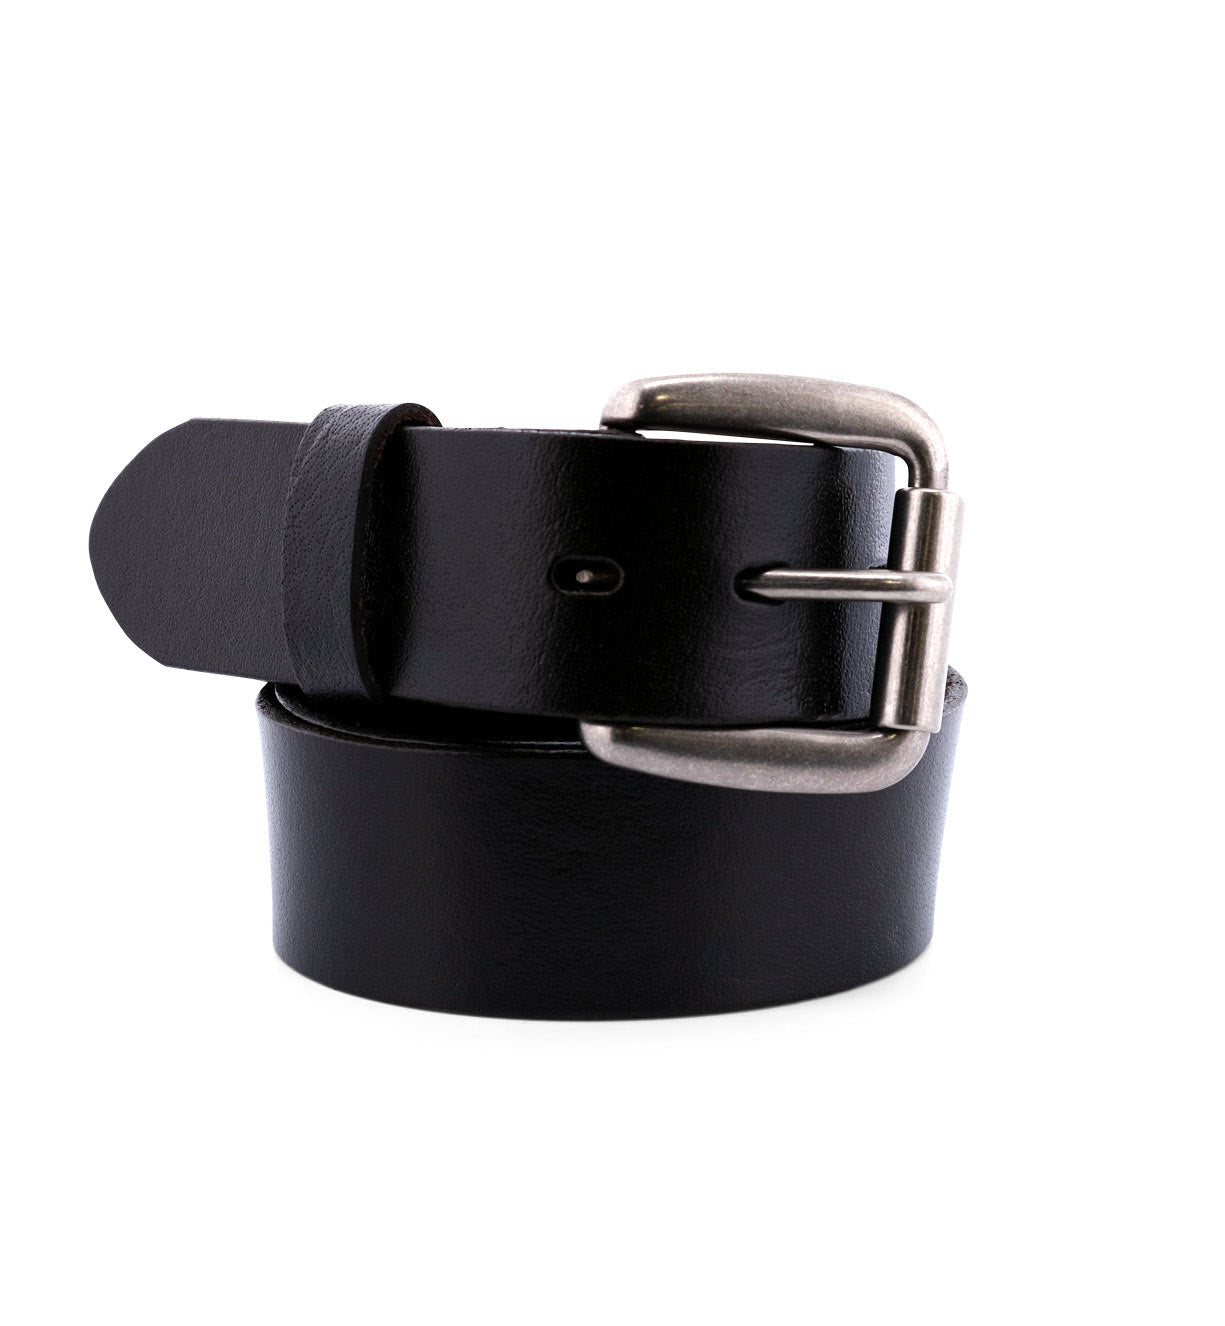 A Drifter belt by Bed Stu, made of black leather, on a white background.